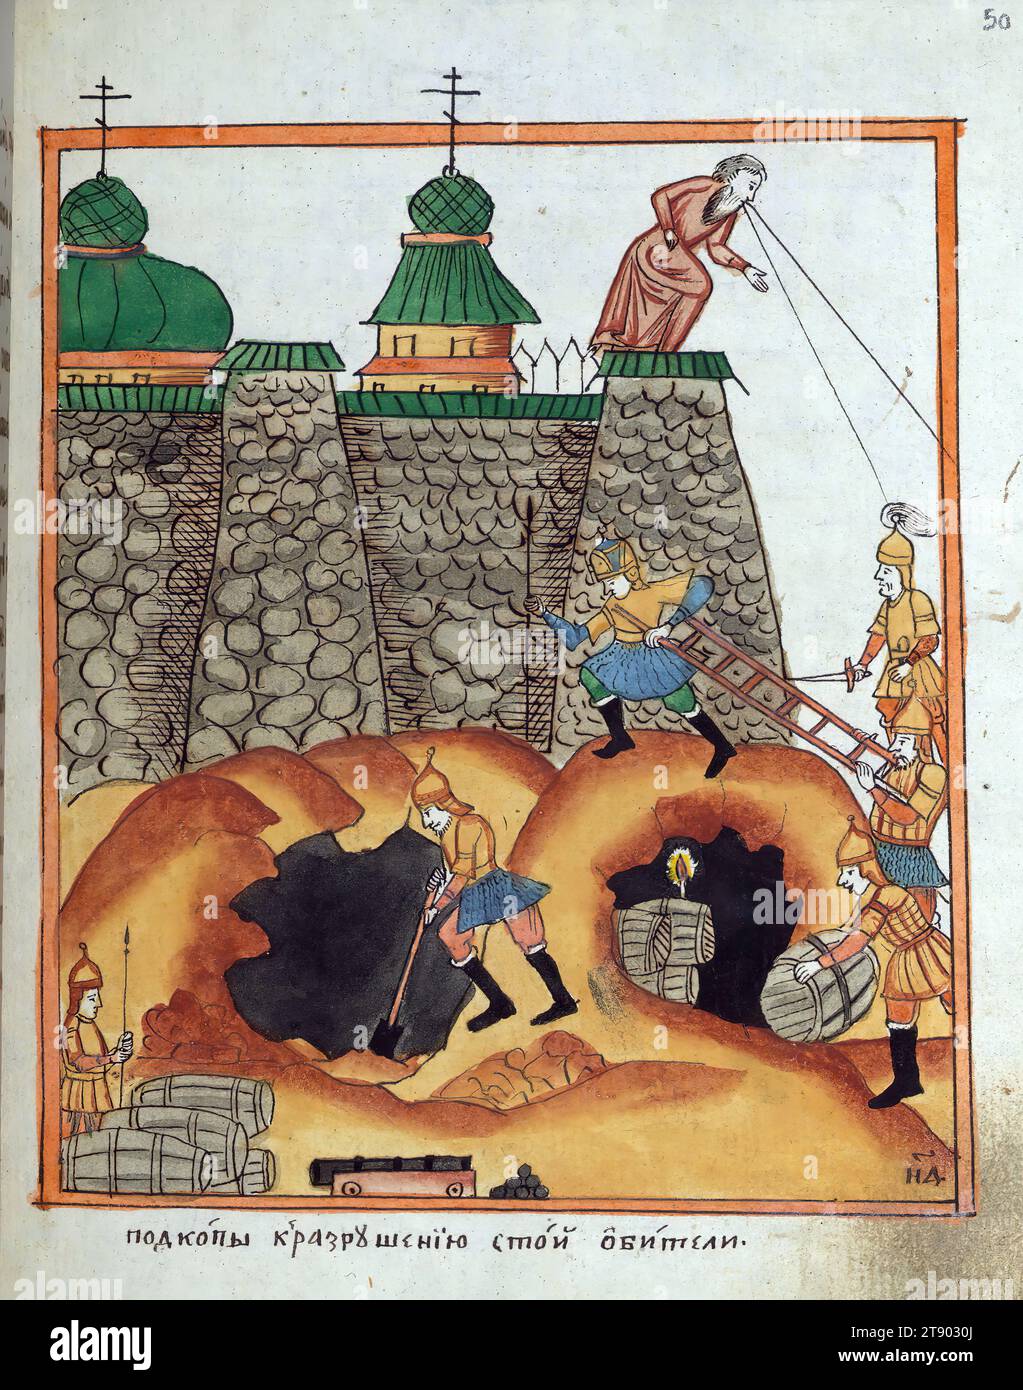 Fathers of the Solovetsky Monastery and their sufferings, Siege preparations against the monastery, This manuscript was made around 1800 by an often persecuted group of Russian Christians, the 'Old Believers.' Because this group frequently had its books confiscated and was denied the use of printing presses, its members continued to write important books such as this one by hand Stock Photo